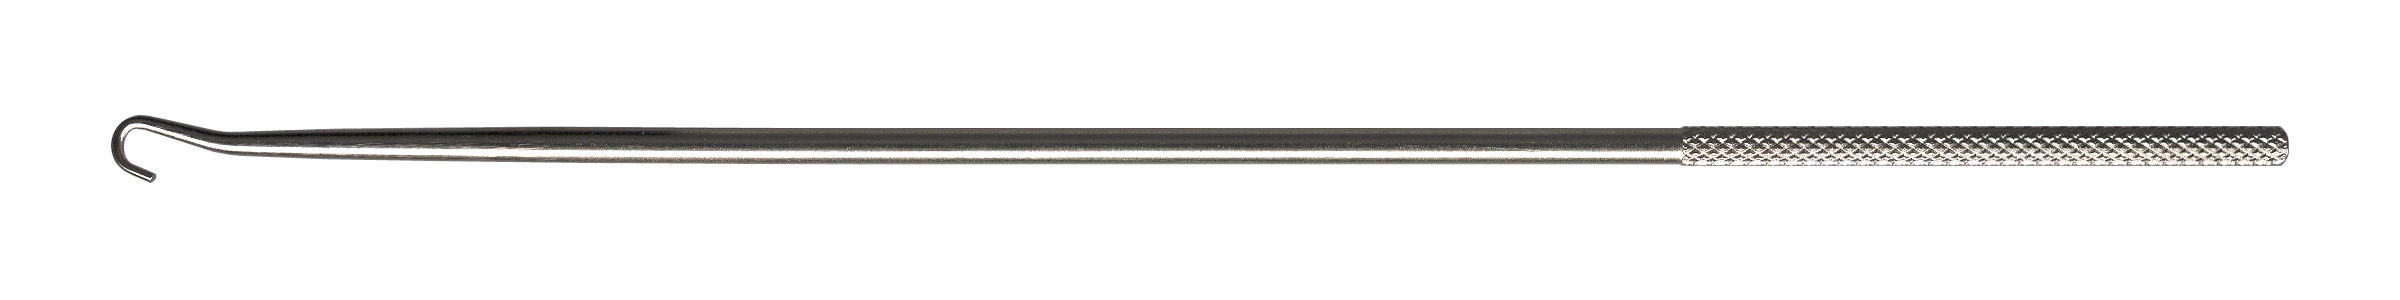 General Purpose Spring Puller, 7 1/4 inch Size